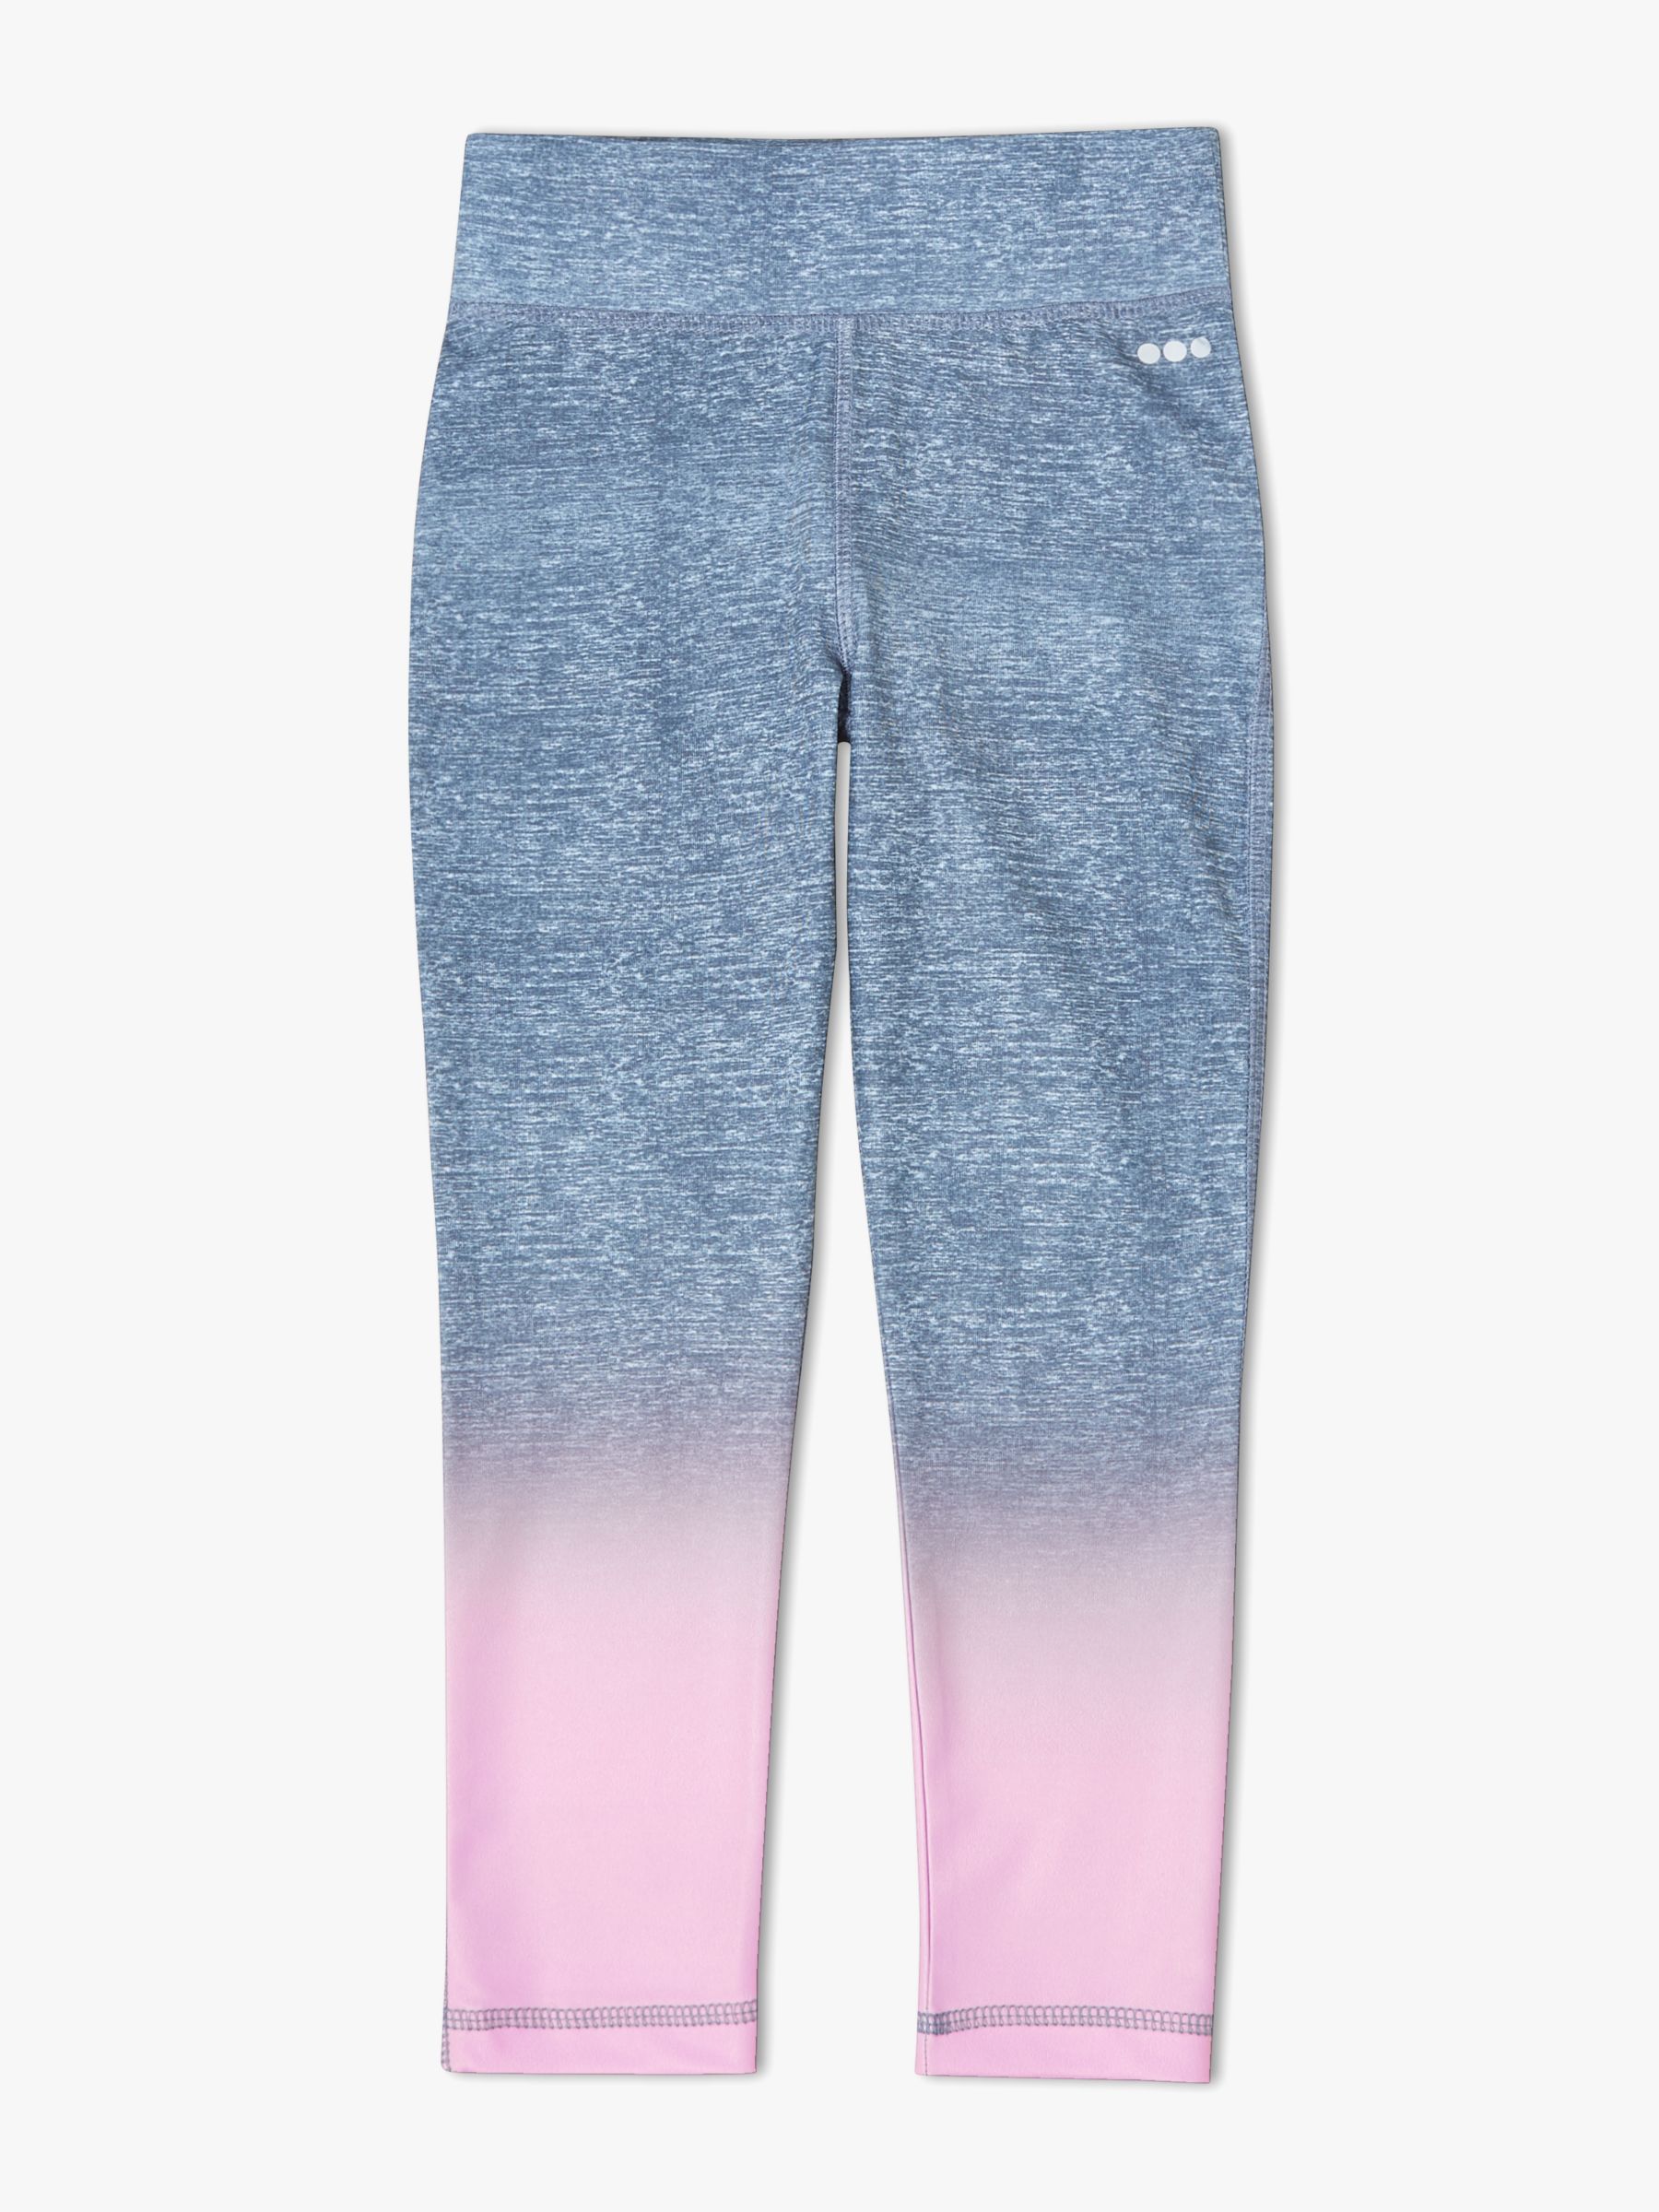 John Lewis & Partners Girls' Ombre Sports Leggings, Lilac, 10 years